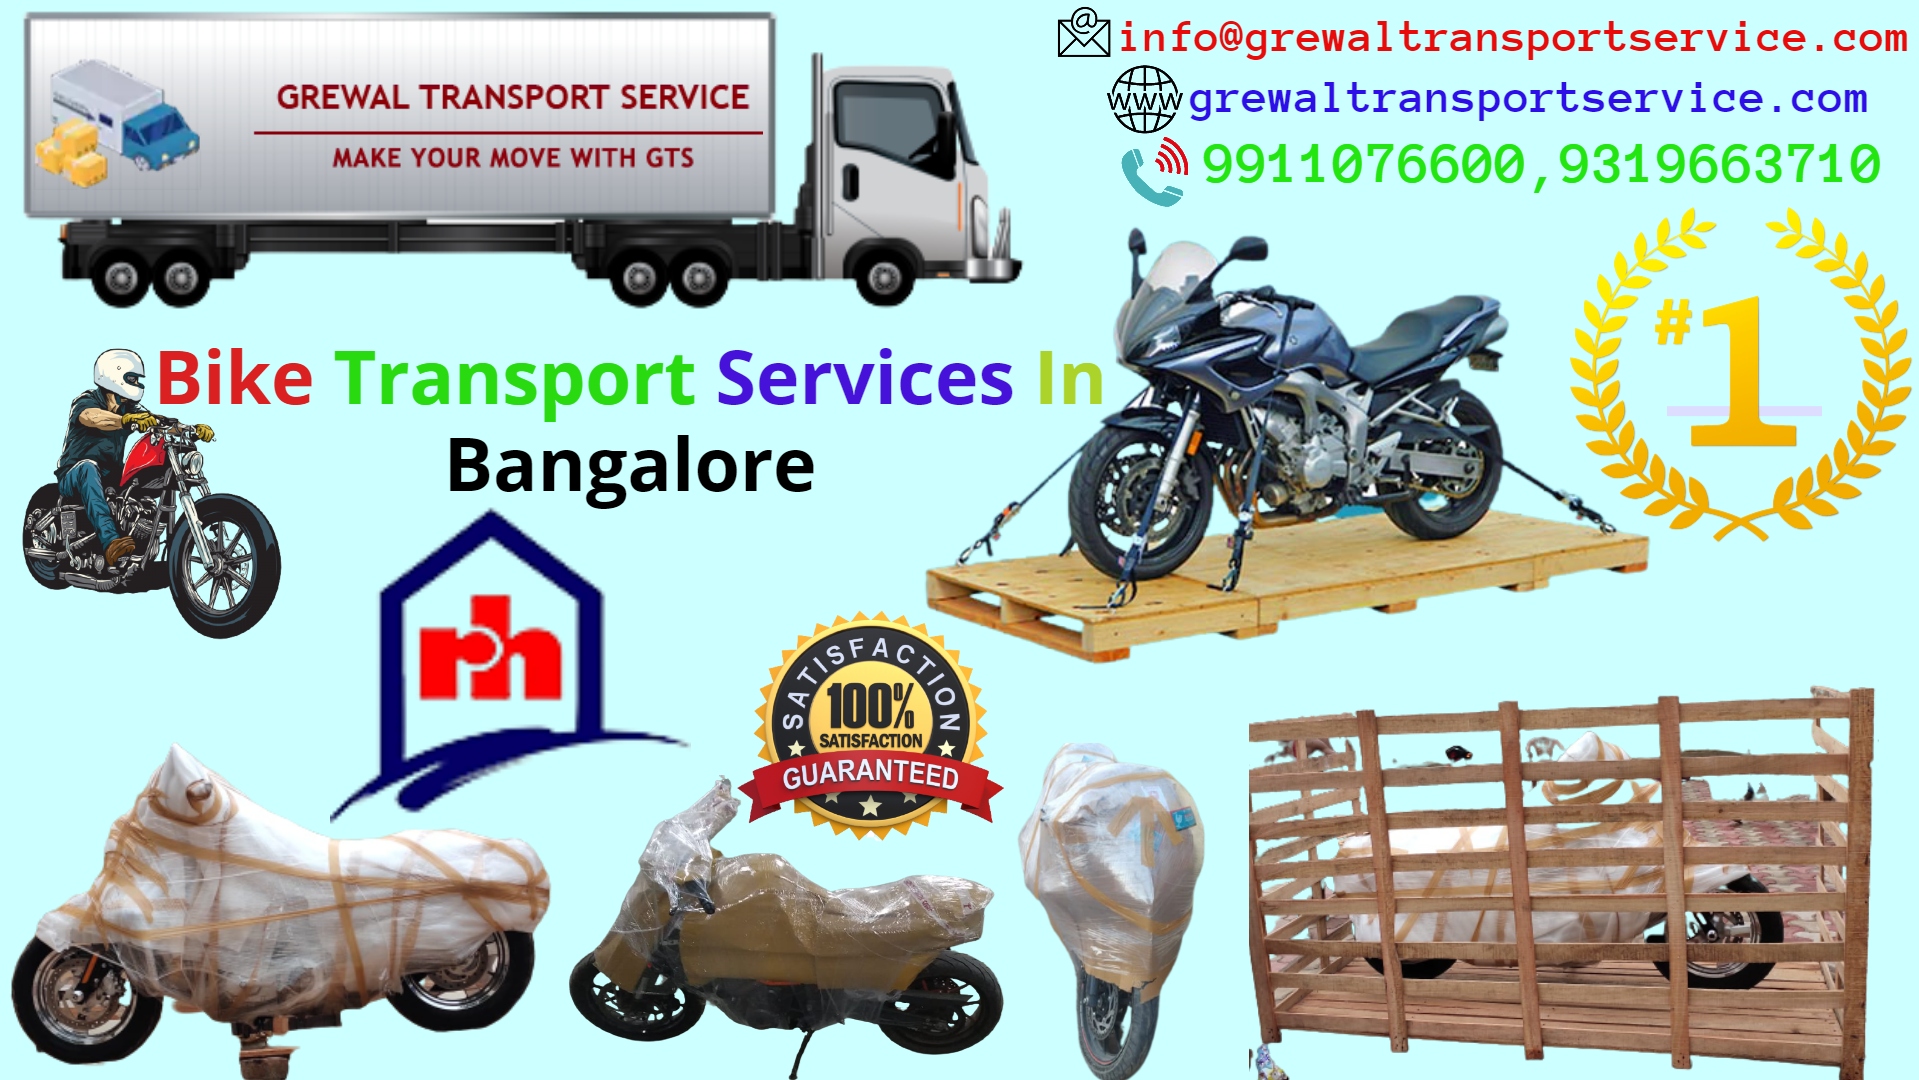 Bike transport services in Bangalore | Grewal charges